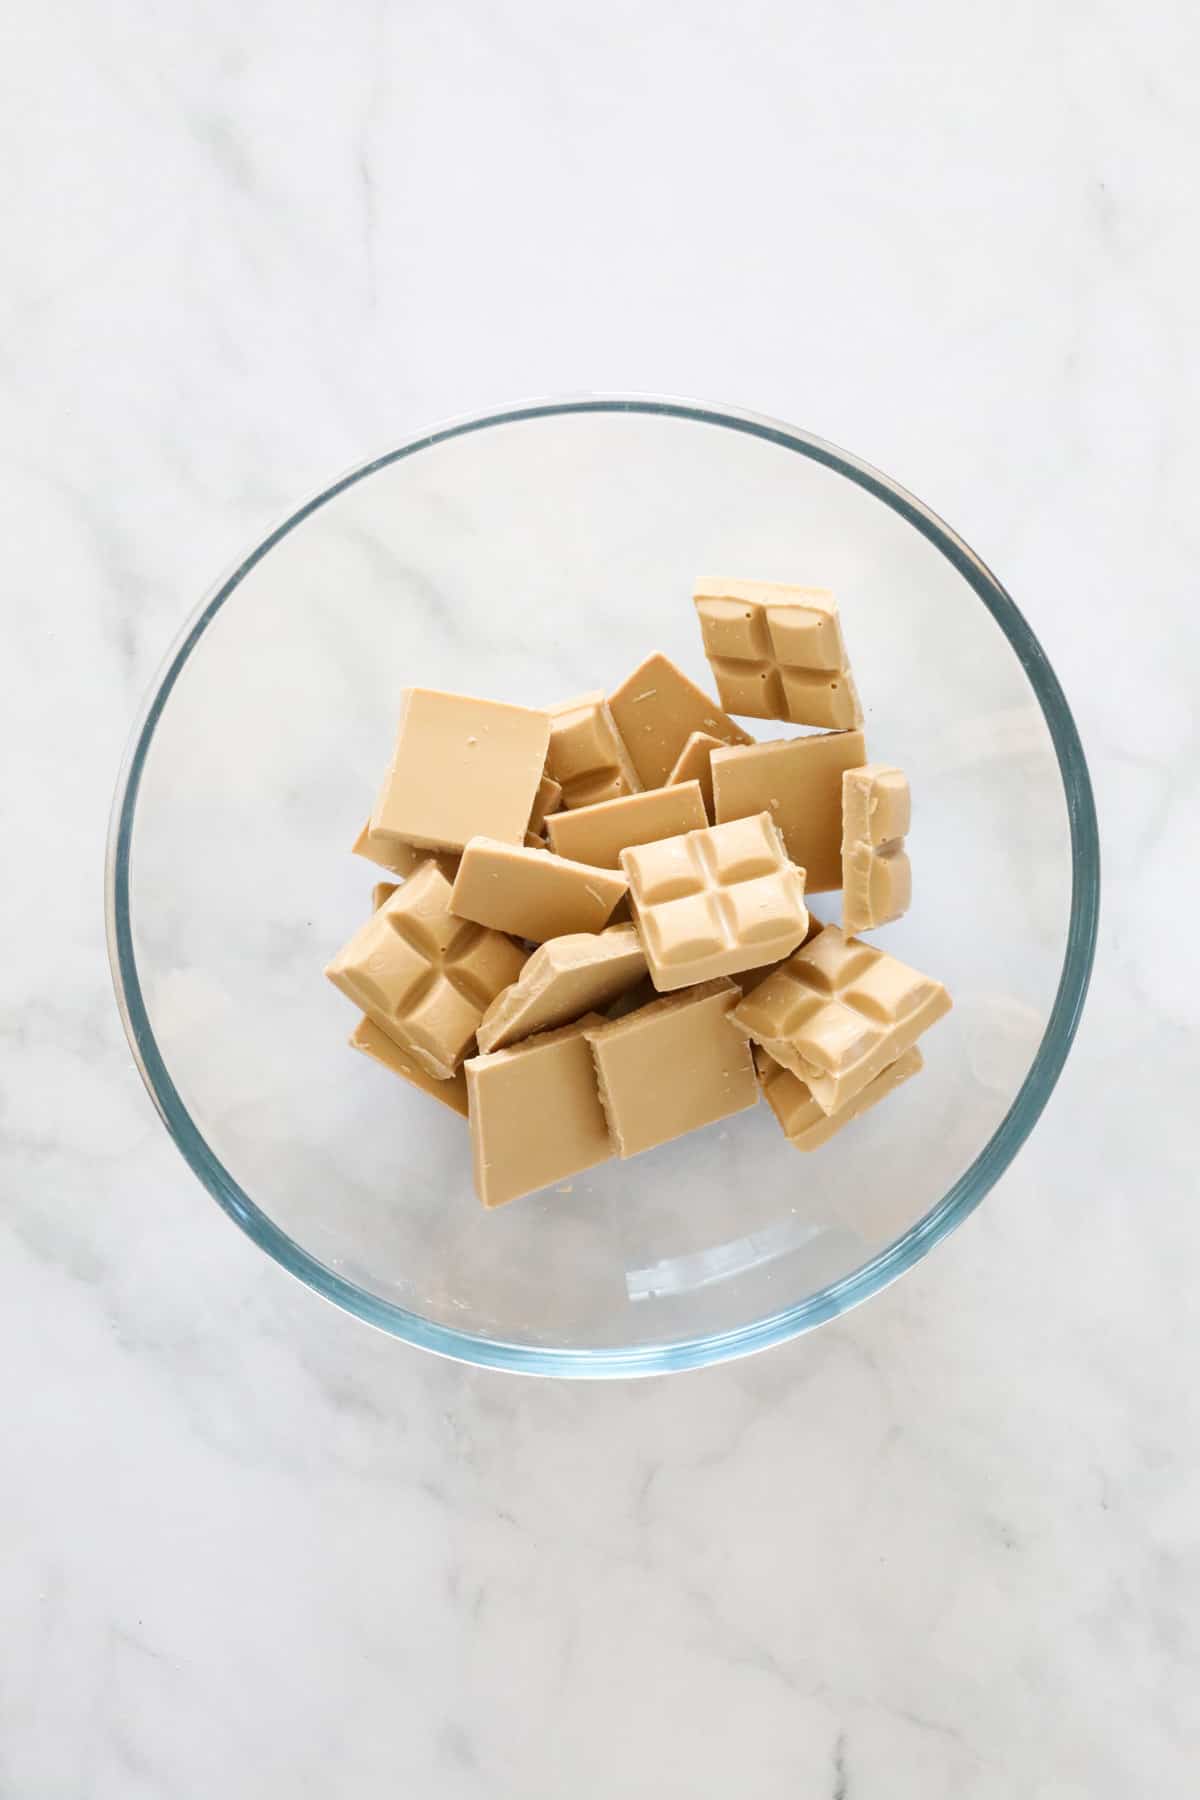 Pieces of Caramilk chocolate in a glass bowl.